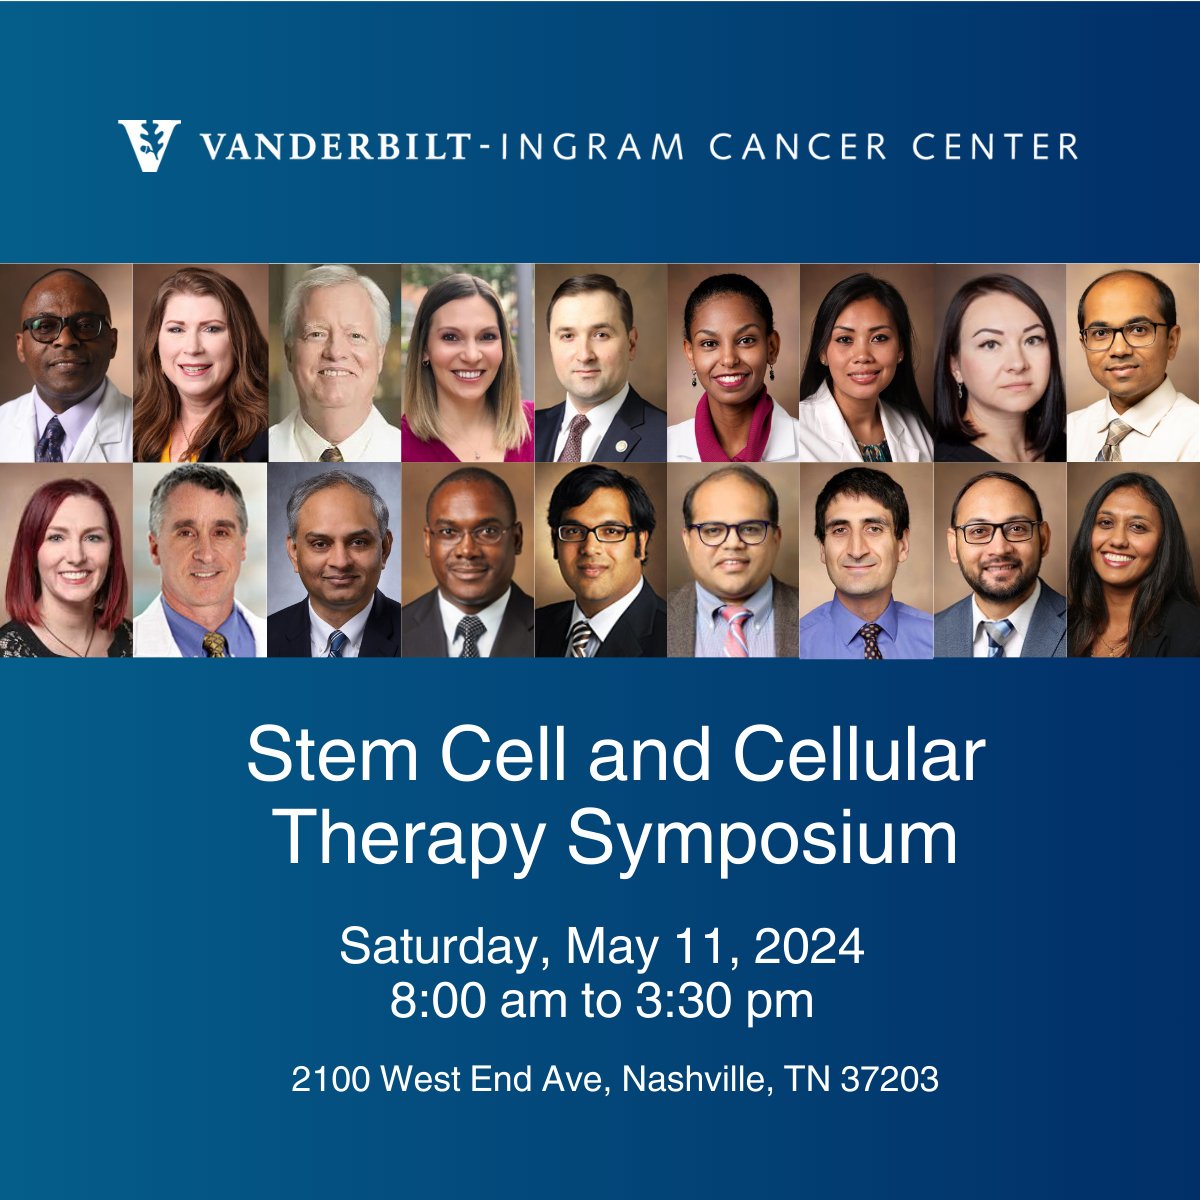 .@VUMC_Cancer would like you to join us at our 2024 Vanderbilt Stem Cell Transplant and Cellular Therapy Symposium. For more information on the event, or to register, please visit the link below. spr.ly/6014wA4Ce